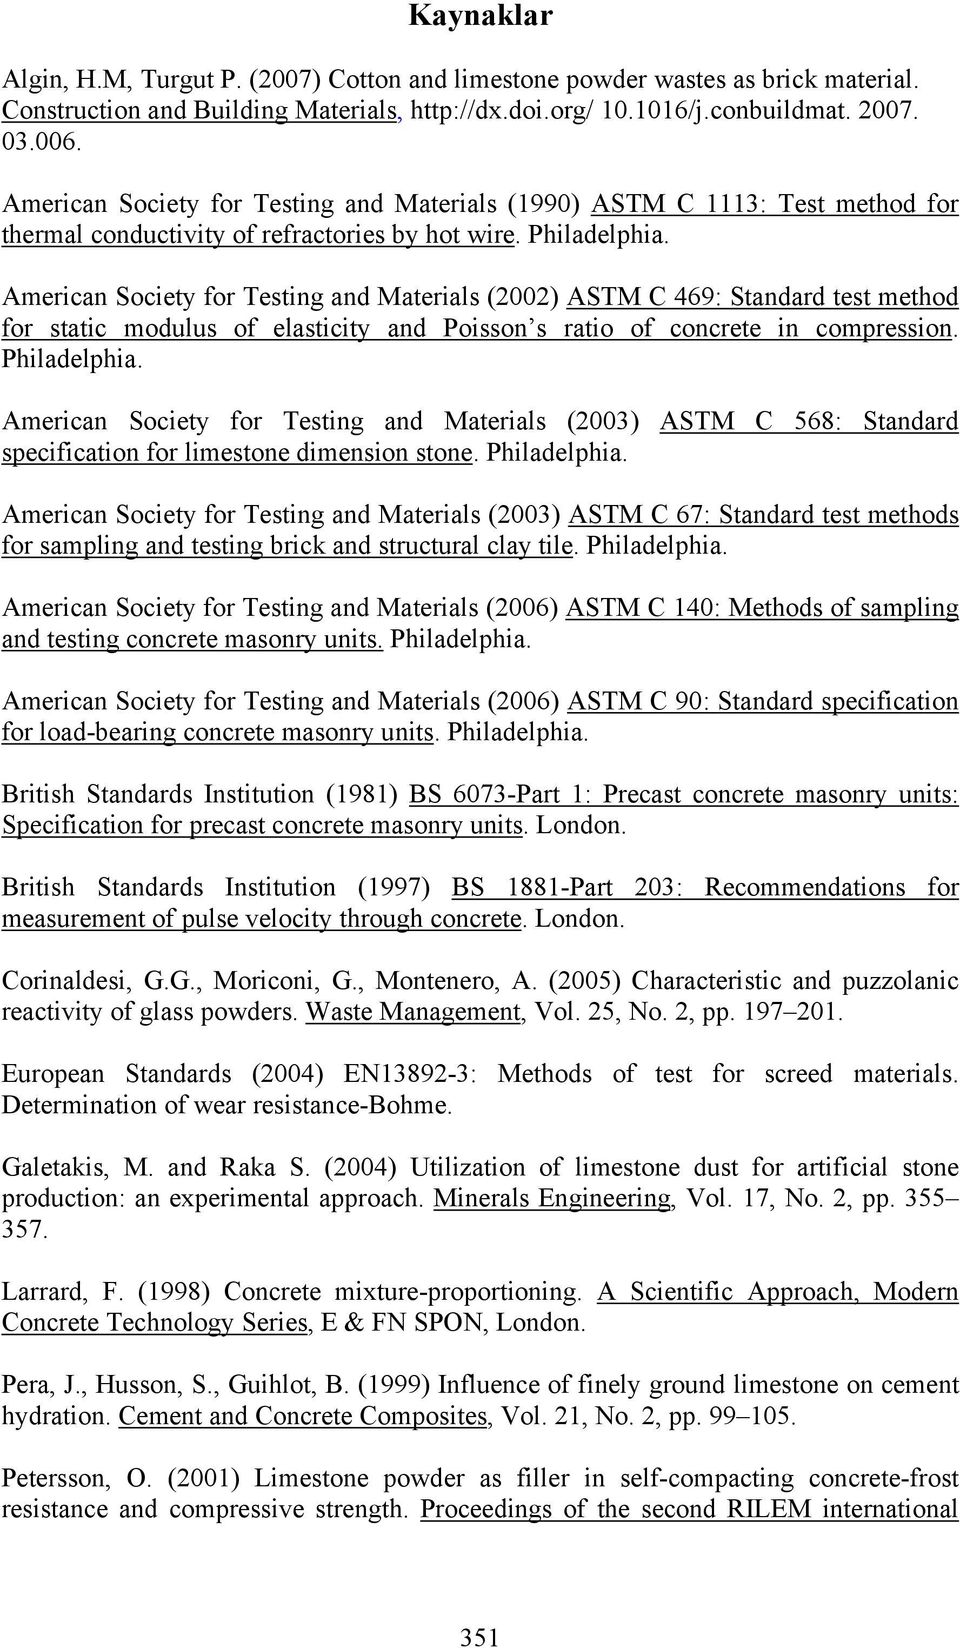 American Society for Testing and Materials (2002) ASTM C 469: Standard test method for static modulus of elasticity and Poisson s ratio of concrete in compression. Philadelphia.